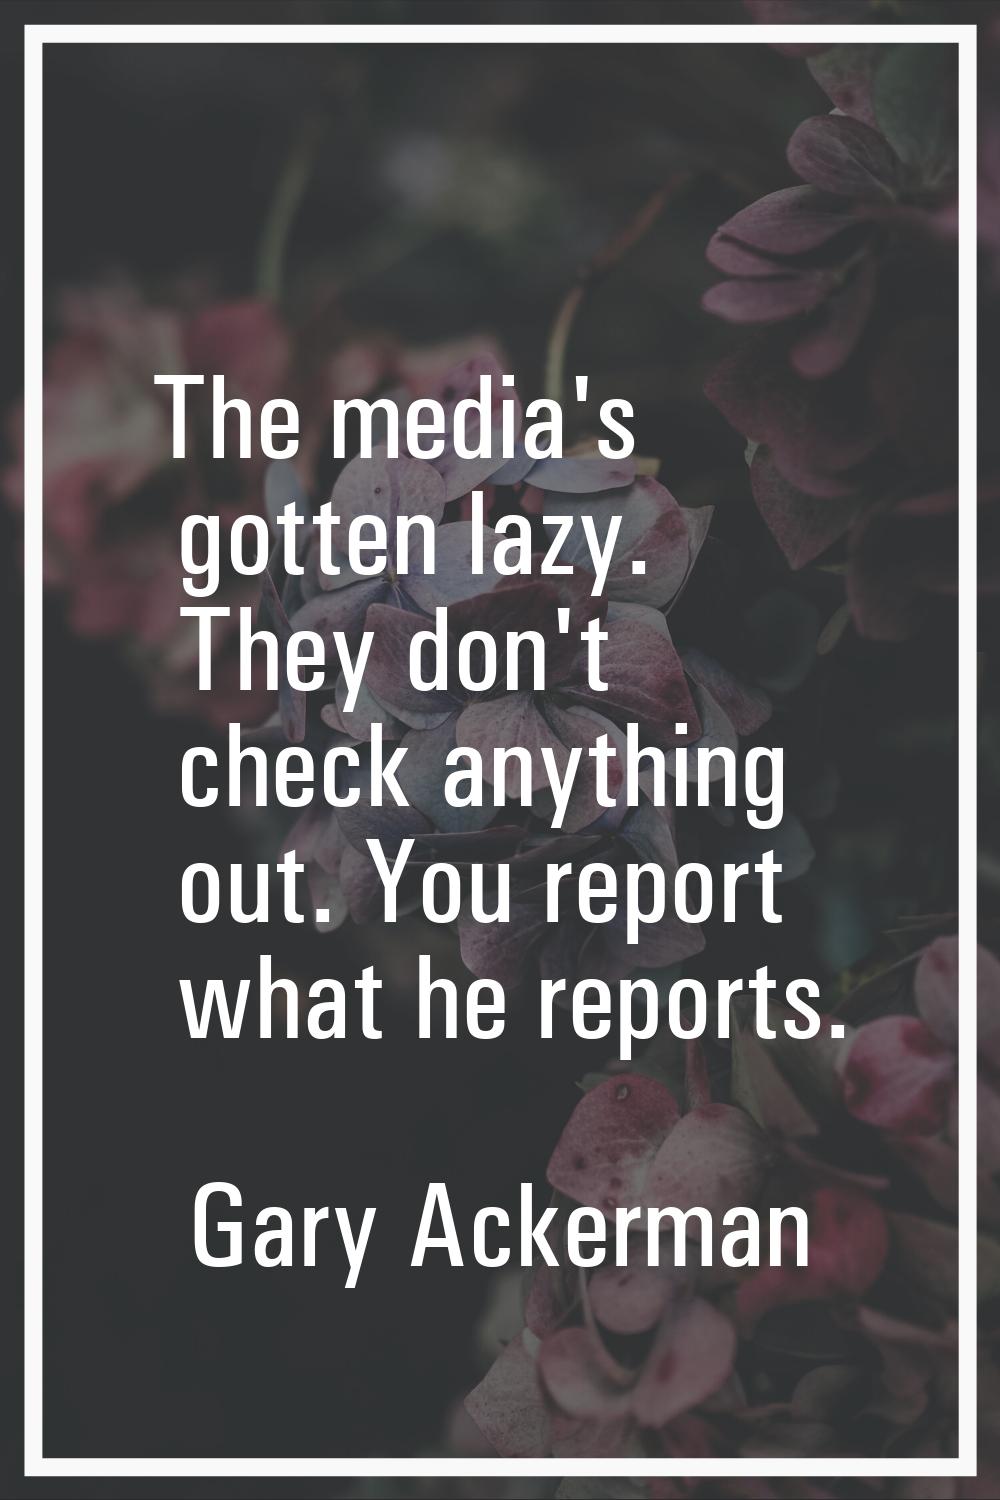 The media's gotten lazy. They don't check anything out. You report what he reports.